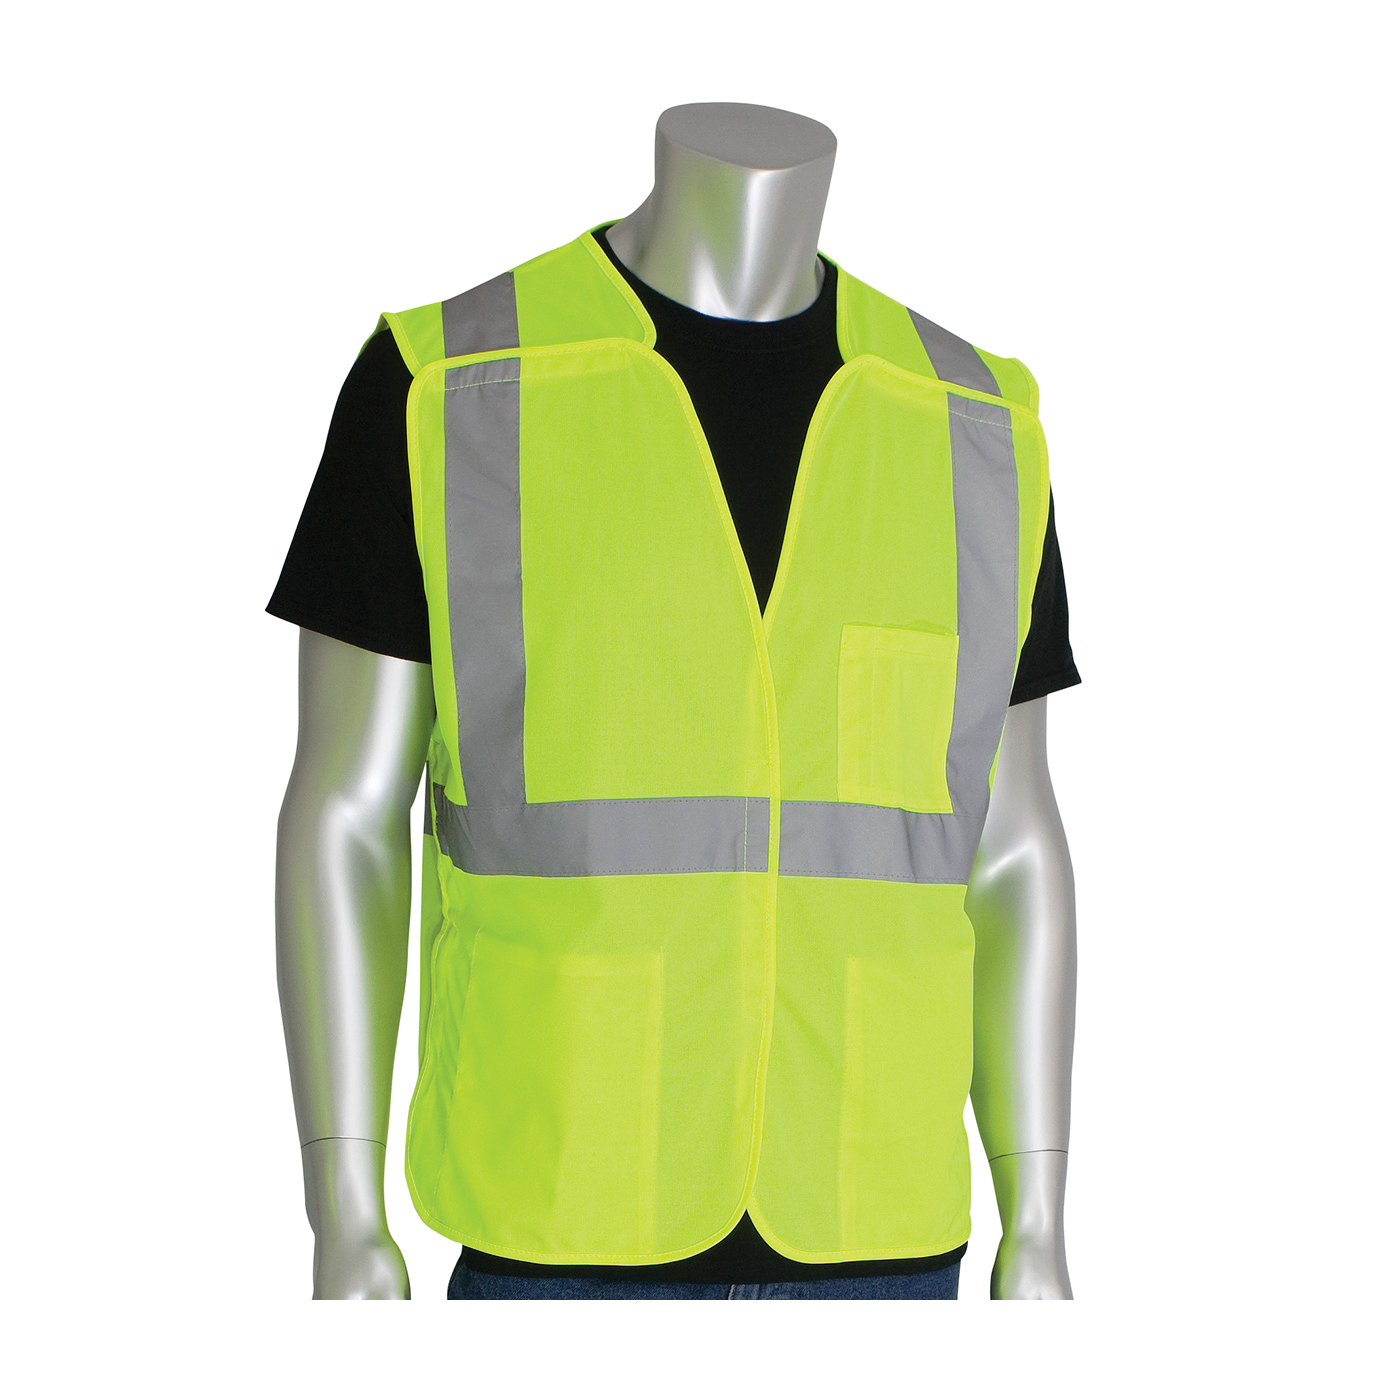 PIP® 302-5PVLY-M Safety Vest, M, Hi-Viz Lime Yellow, Polyester, Hook and Loop Closure, 3 Pockets, ANSI Class: Class 2, Specifications Met: ANSI 107 Type R